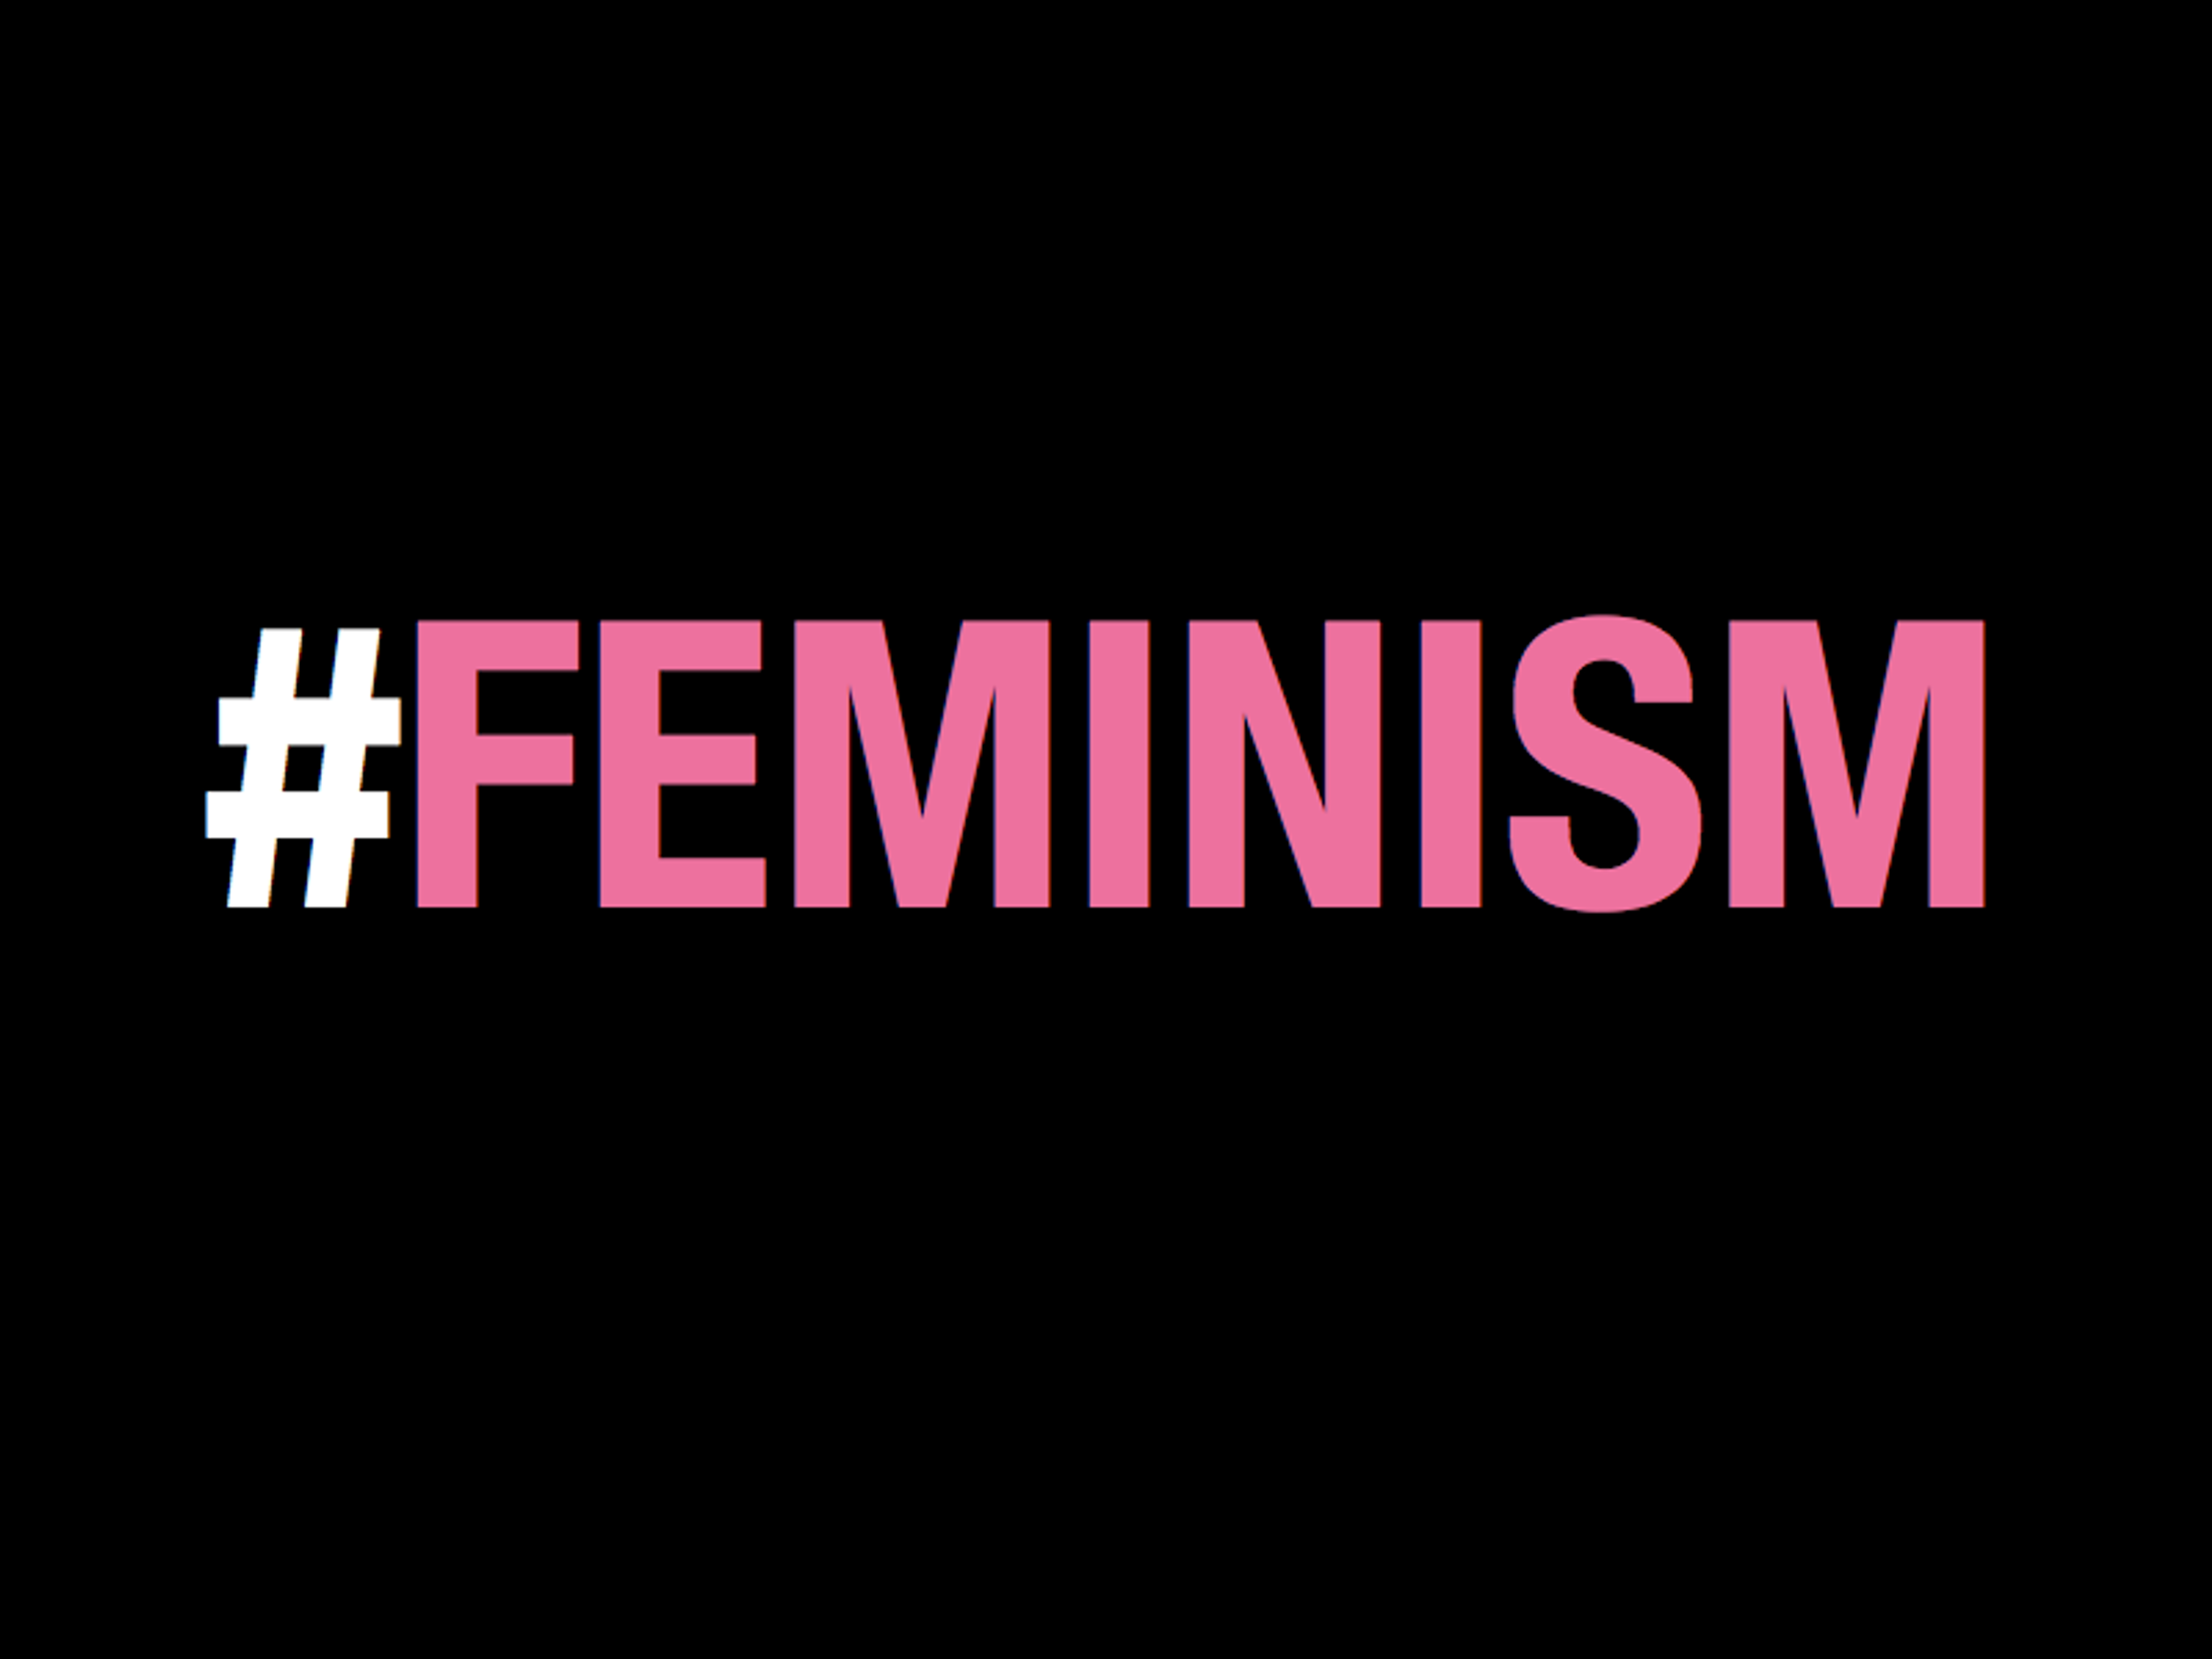 What's The Difference Between Feminism And Egalitarianism?